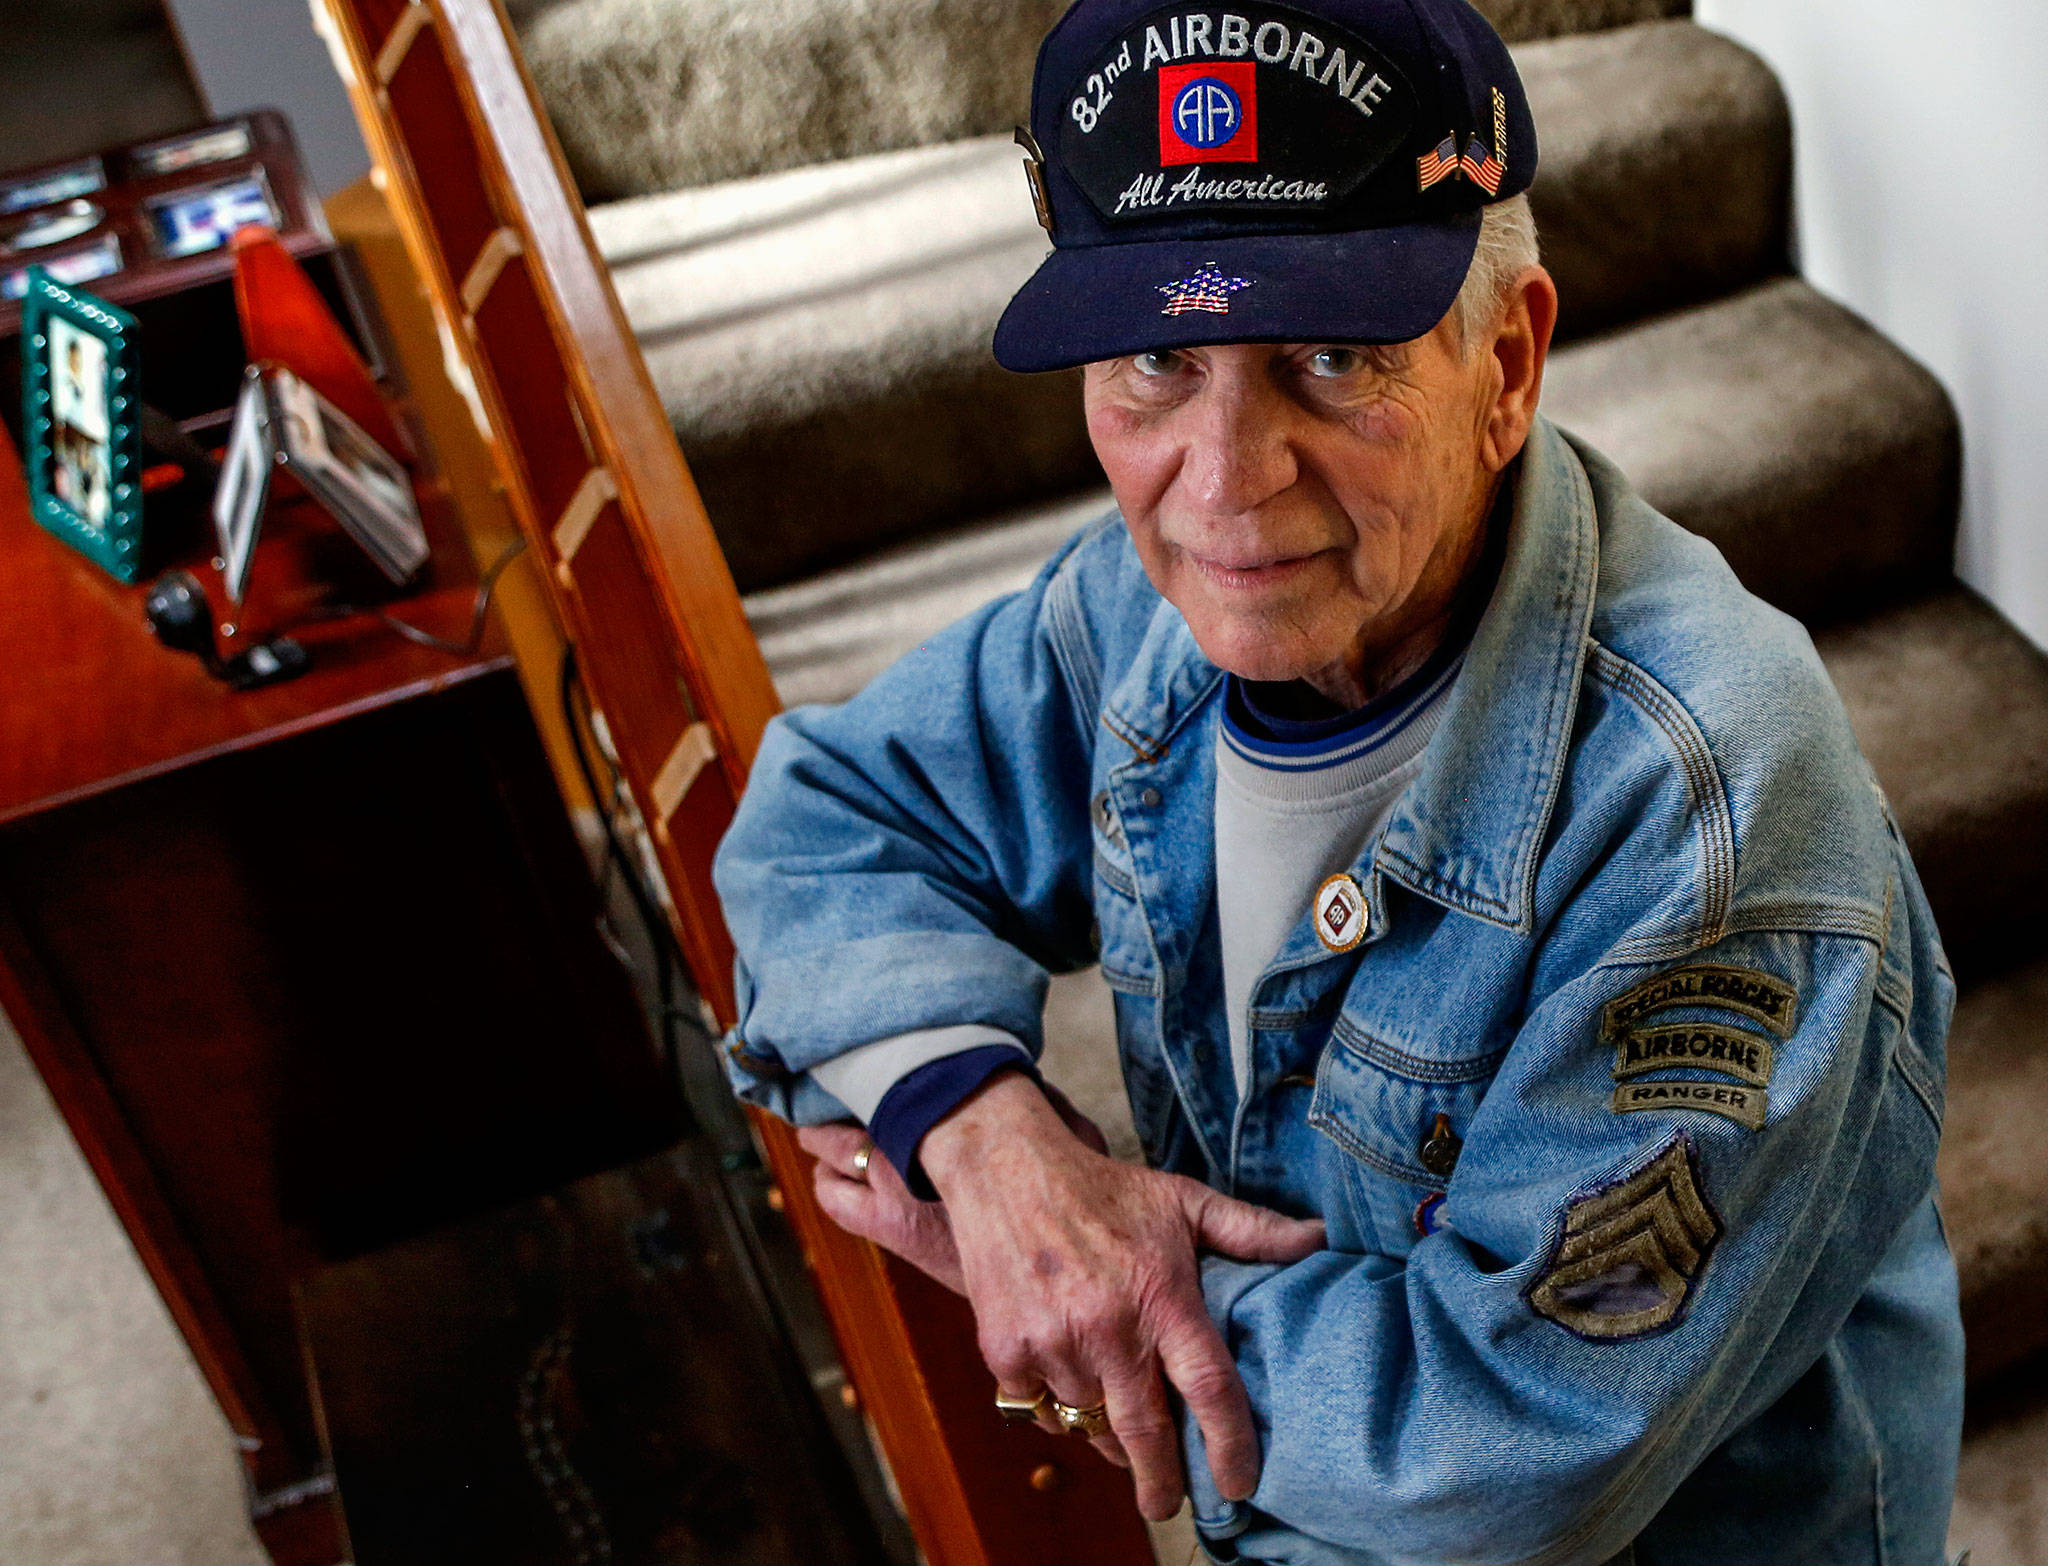 Fred Fillbrook, who served with the U.S. Army’s 82nd Airborne, saw Veterans Day as an “almost forgotten holiday” before he helped establish Mill Creek’s Veterans Day parade several years ago. (Dan Bates / The Herald)